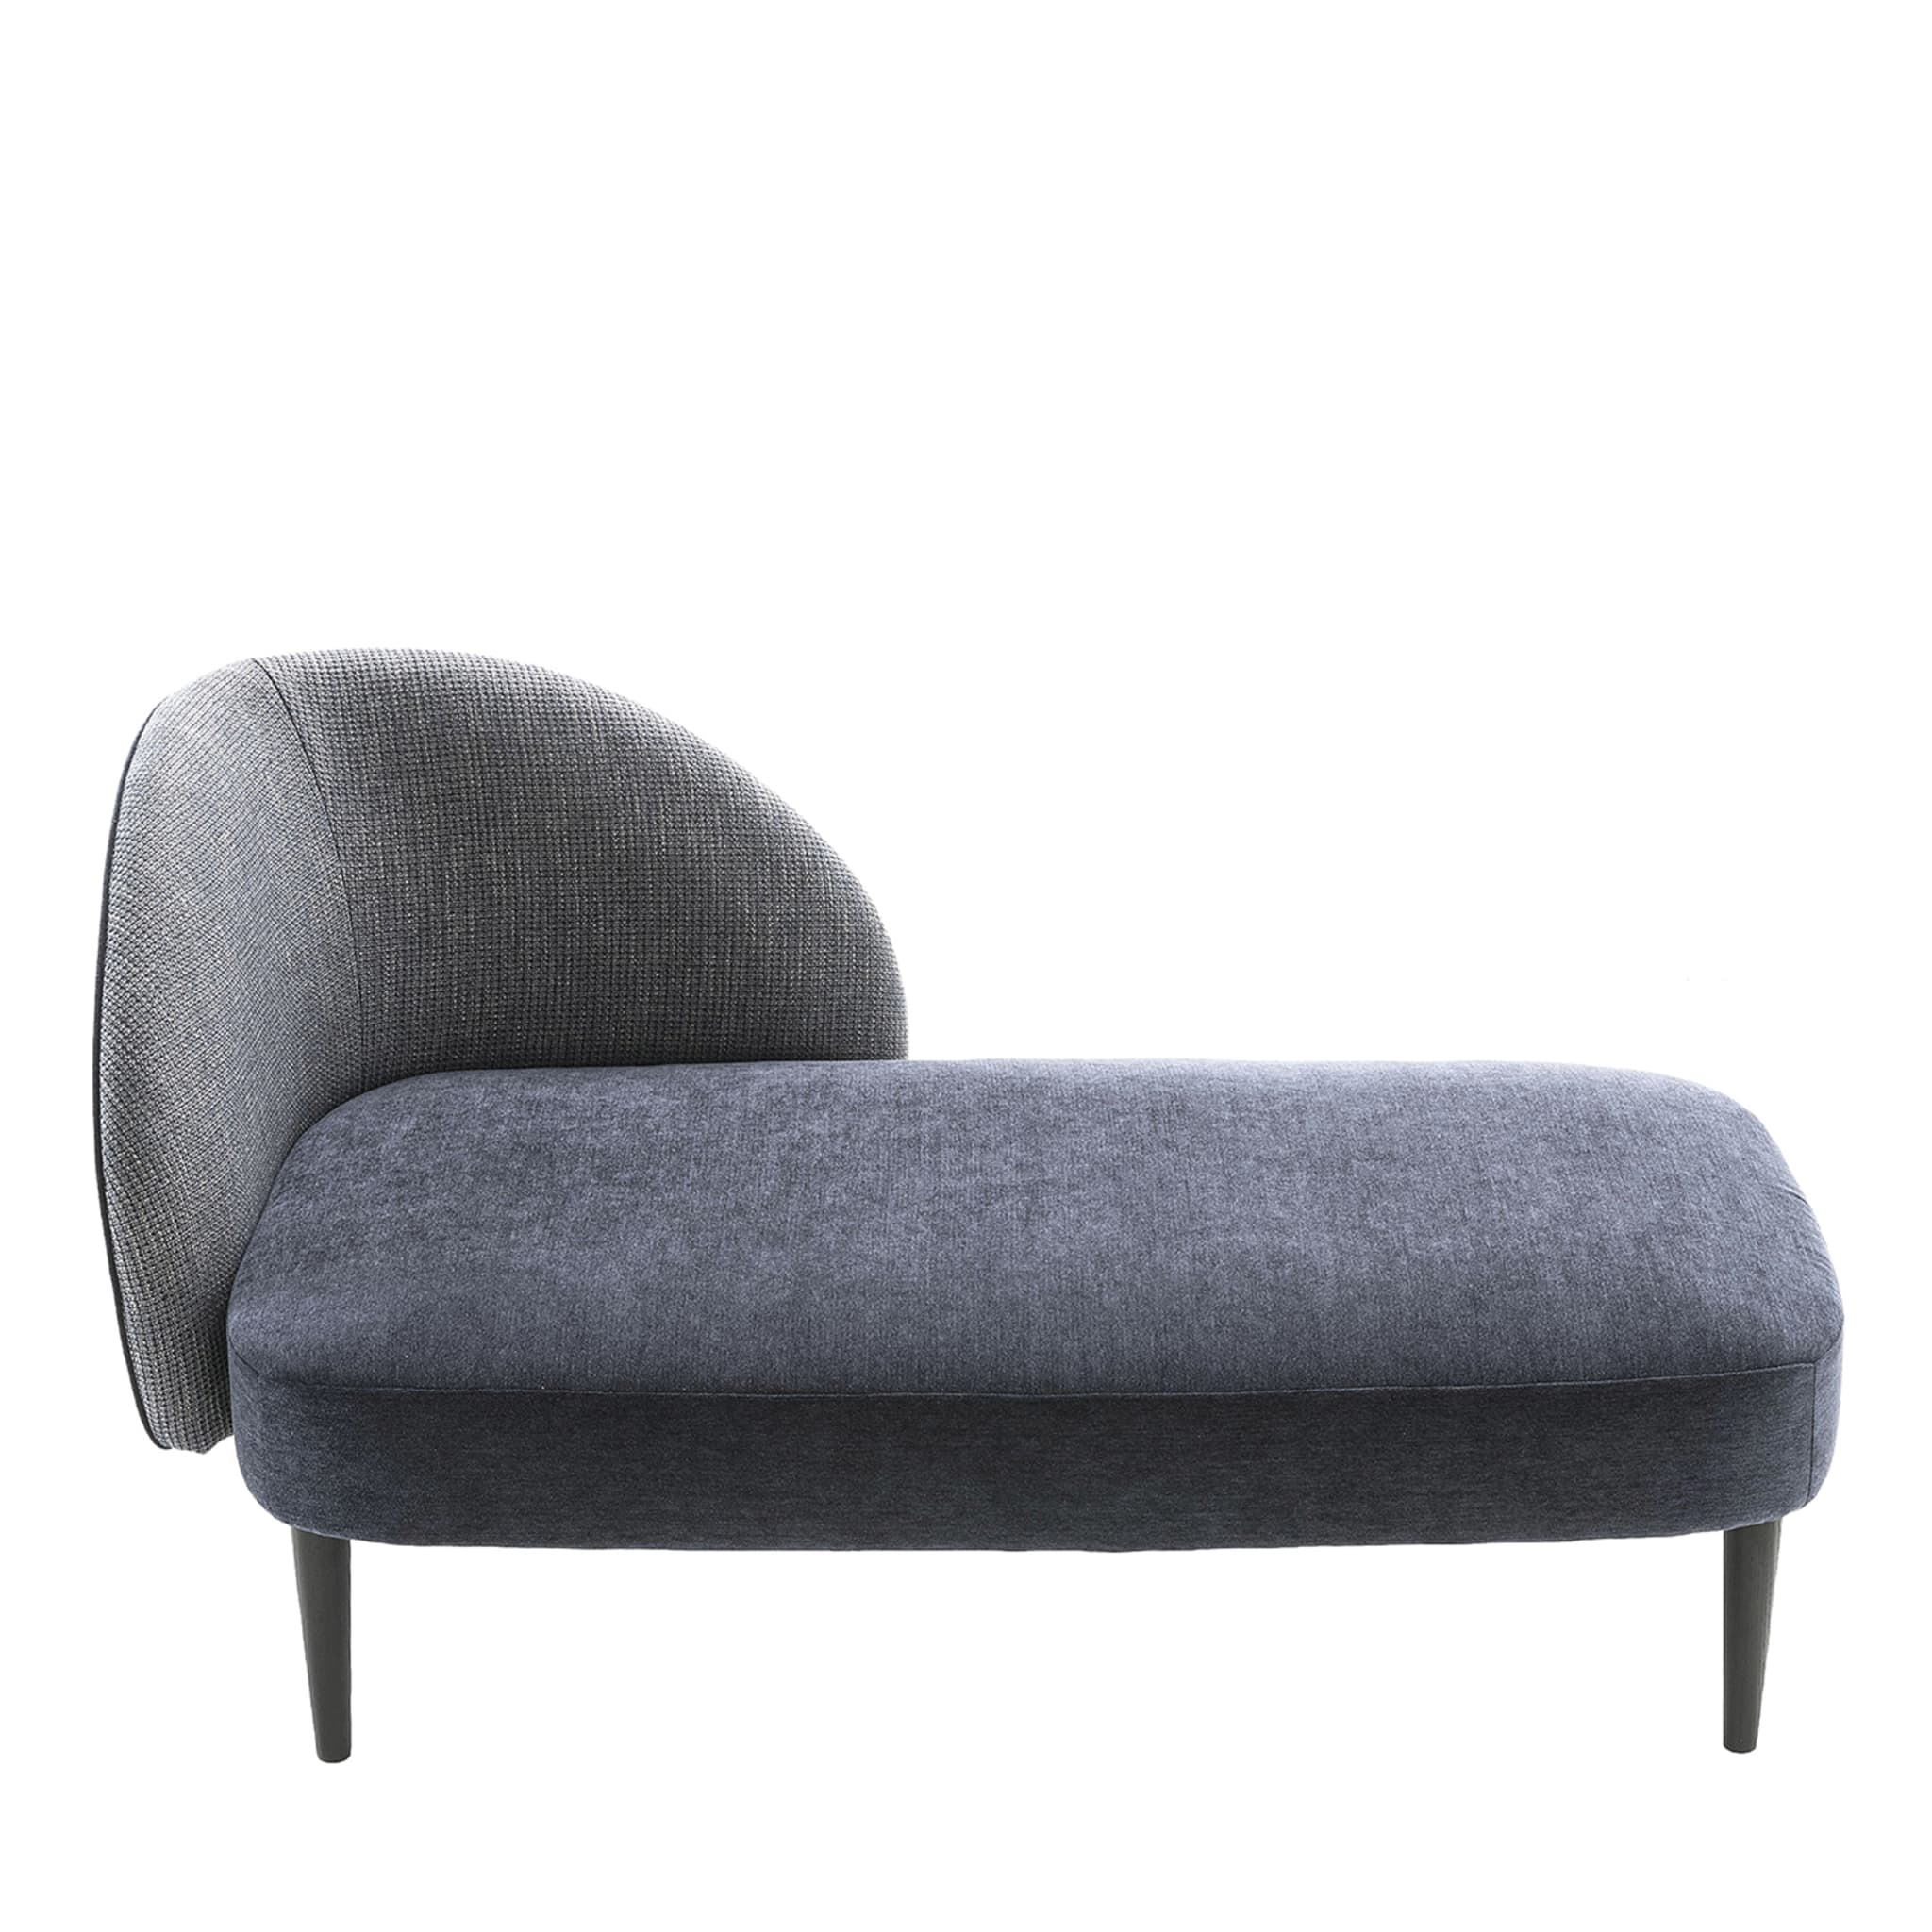 ADAM DAY BED CHAISE LONGUE - Main view